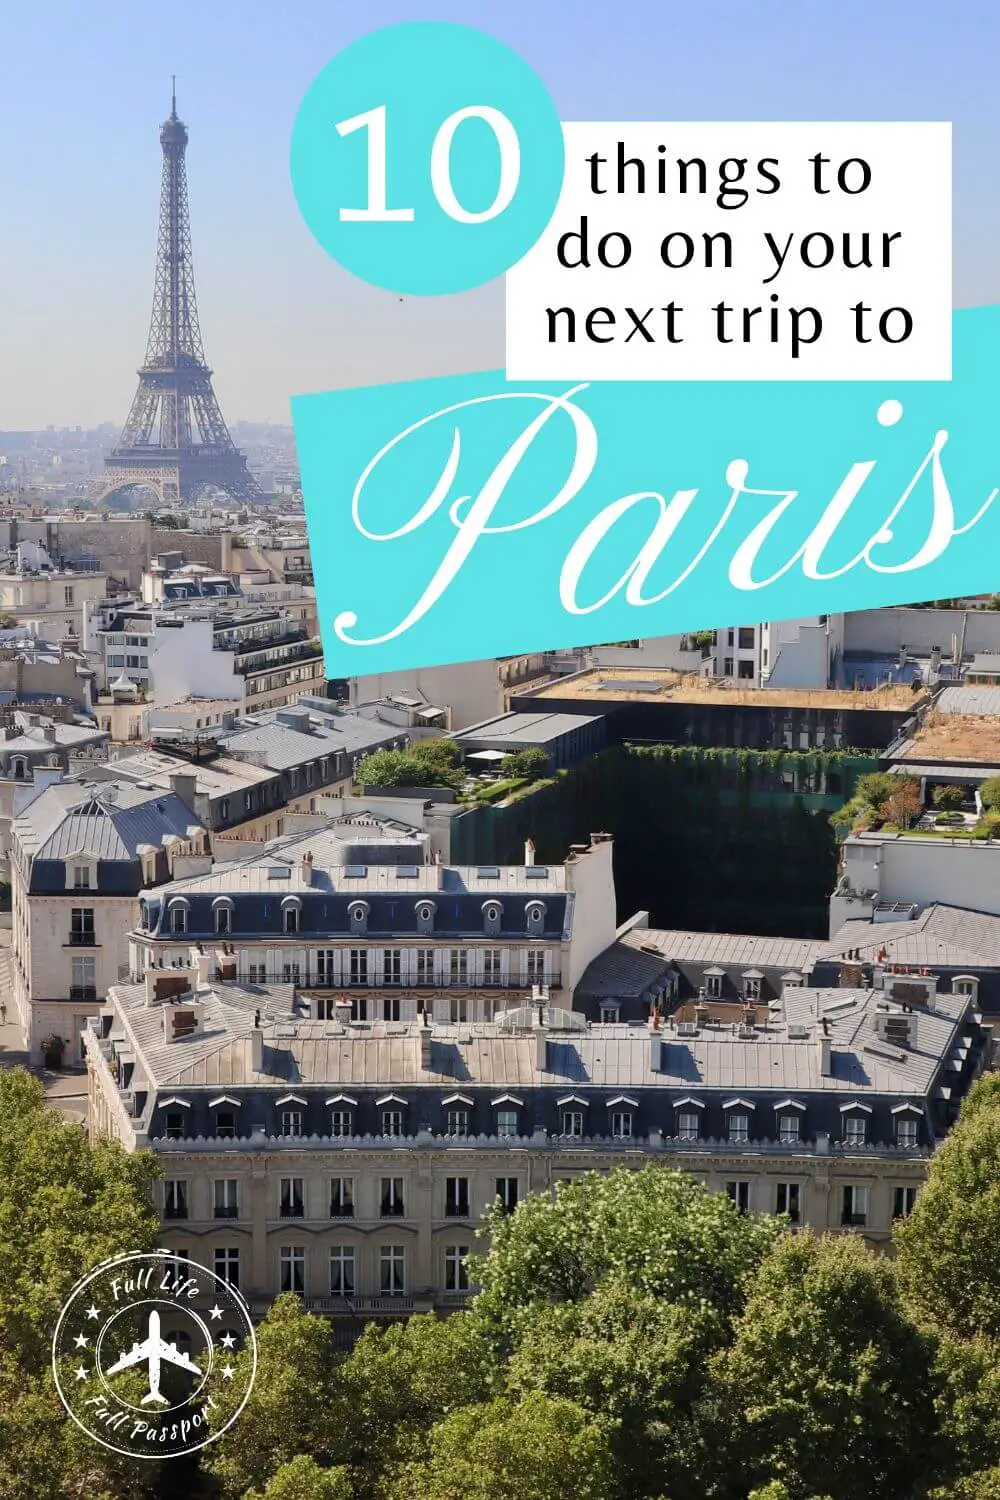 10 Things I Will Do on My Next Trip to Paris